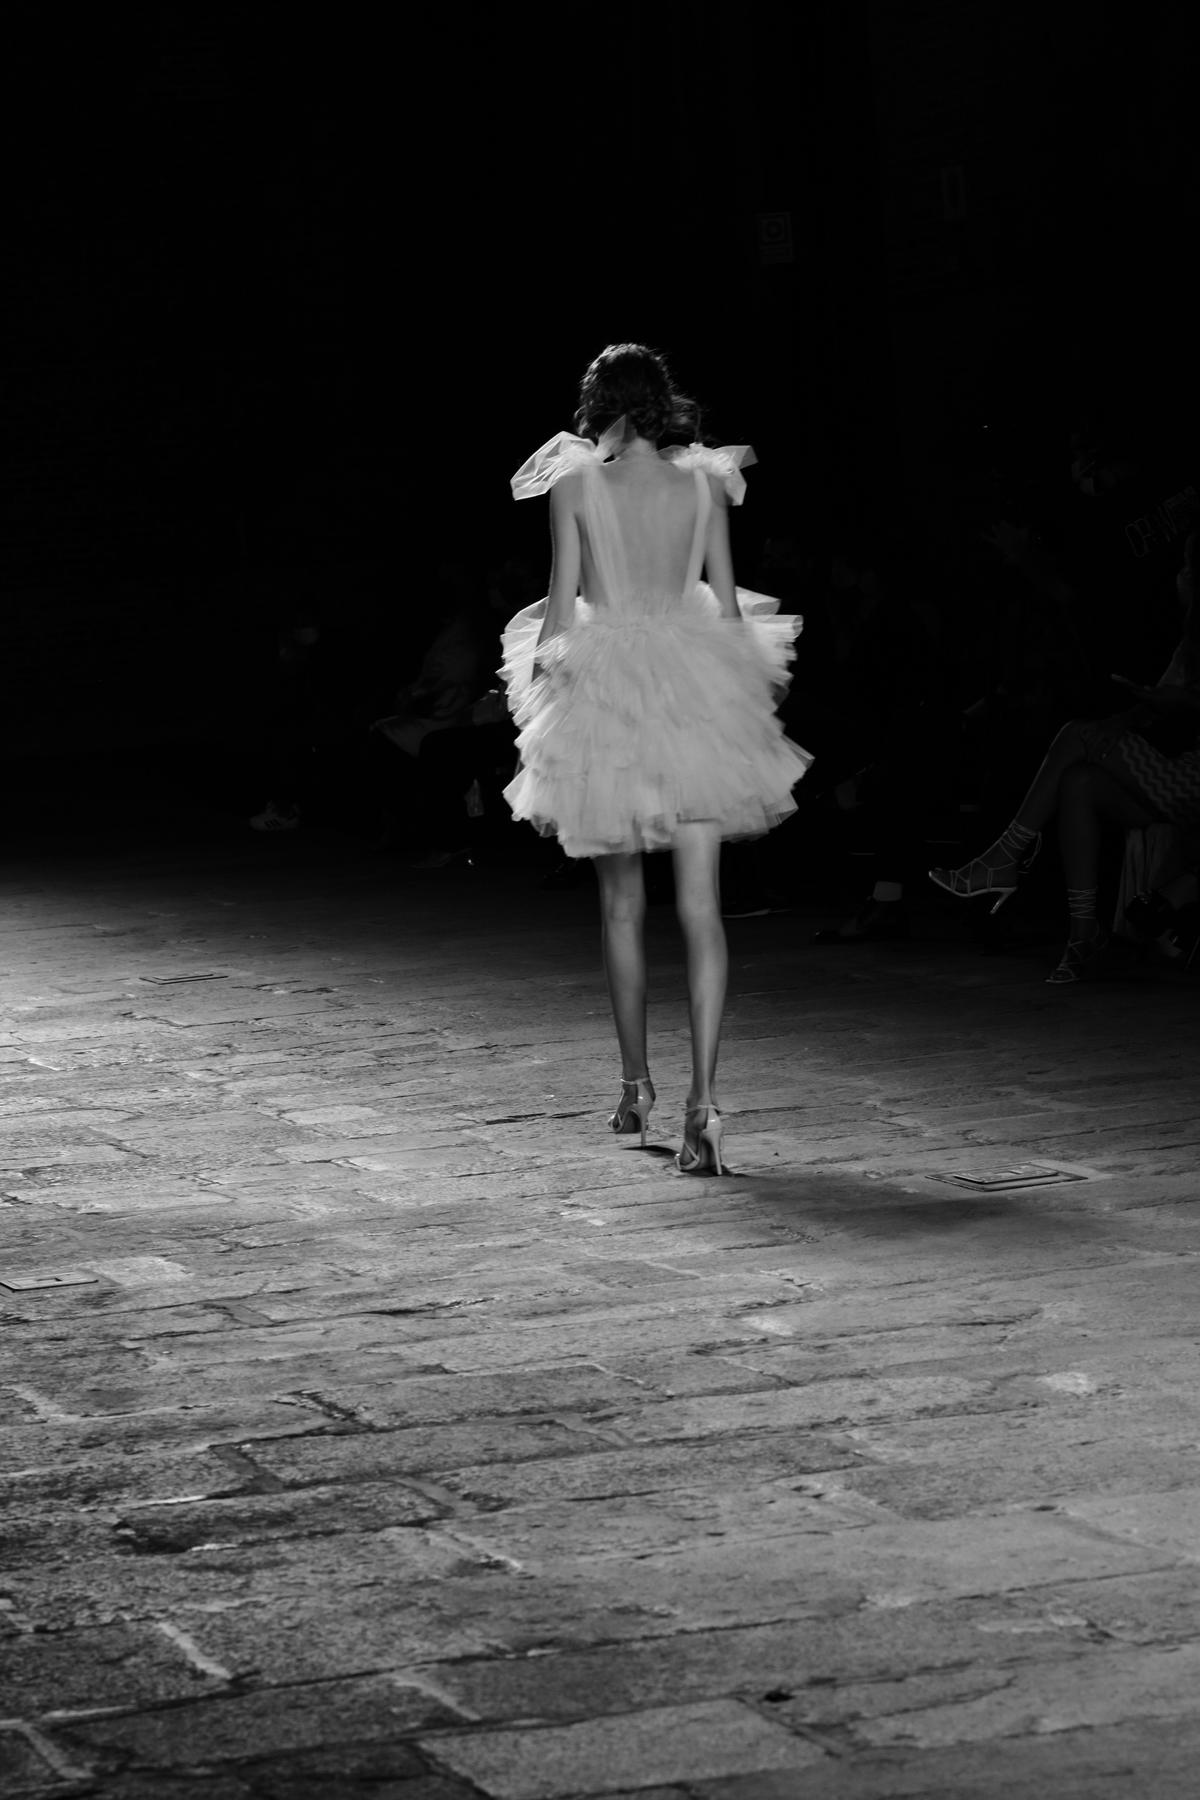 An image of a person confidently walking down a runway wearing a unique and empowering outfit.